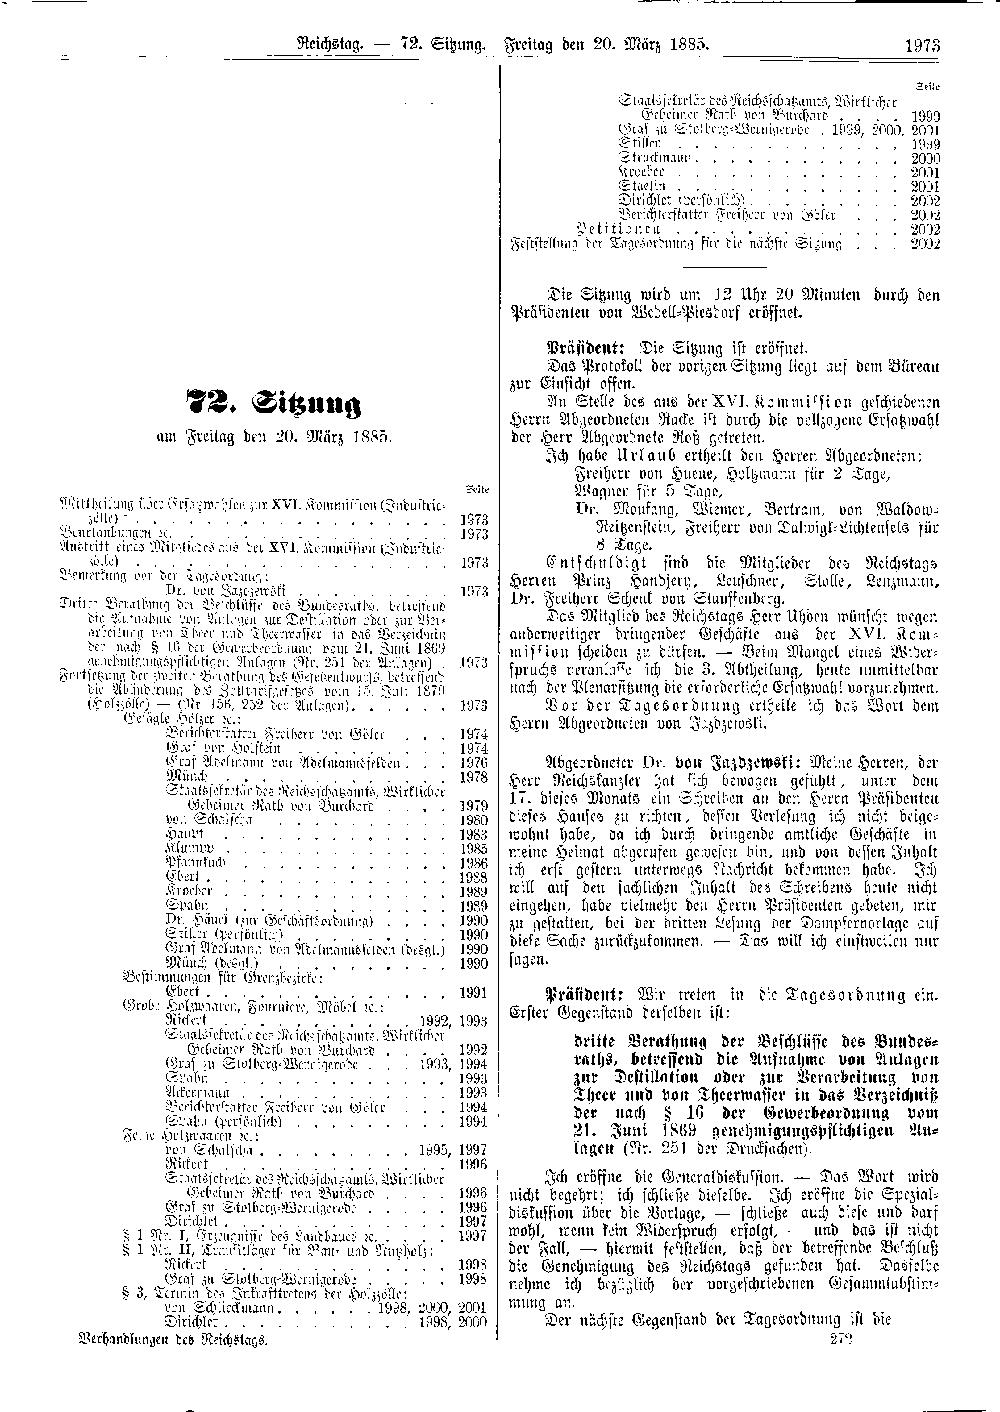 Scan of page 1973